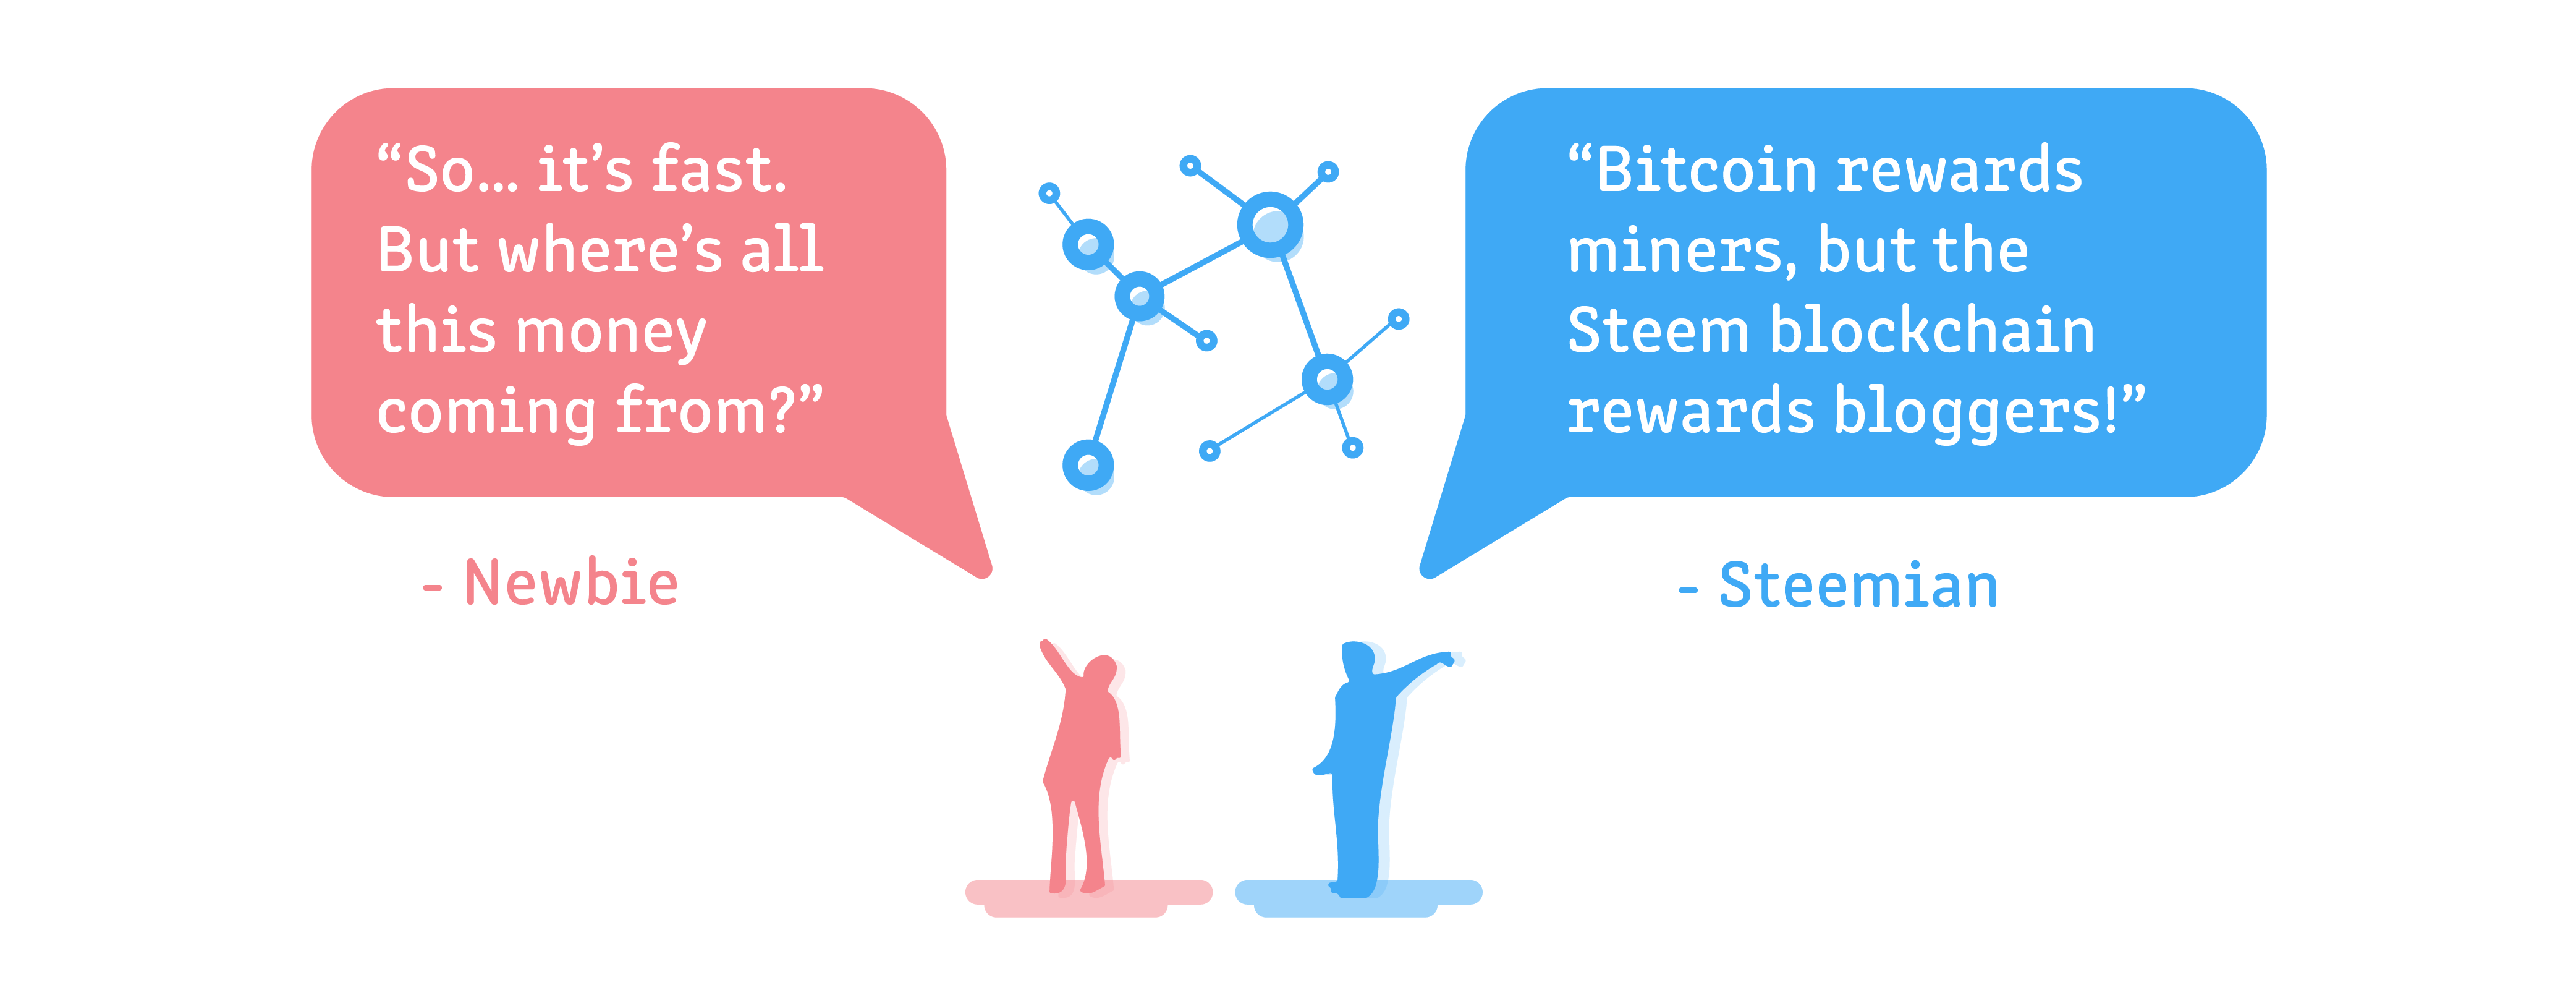 171213_Welcome-to-Steemit-03.png